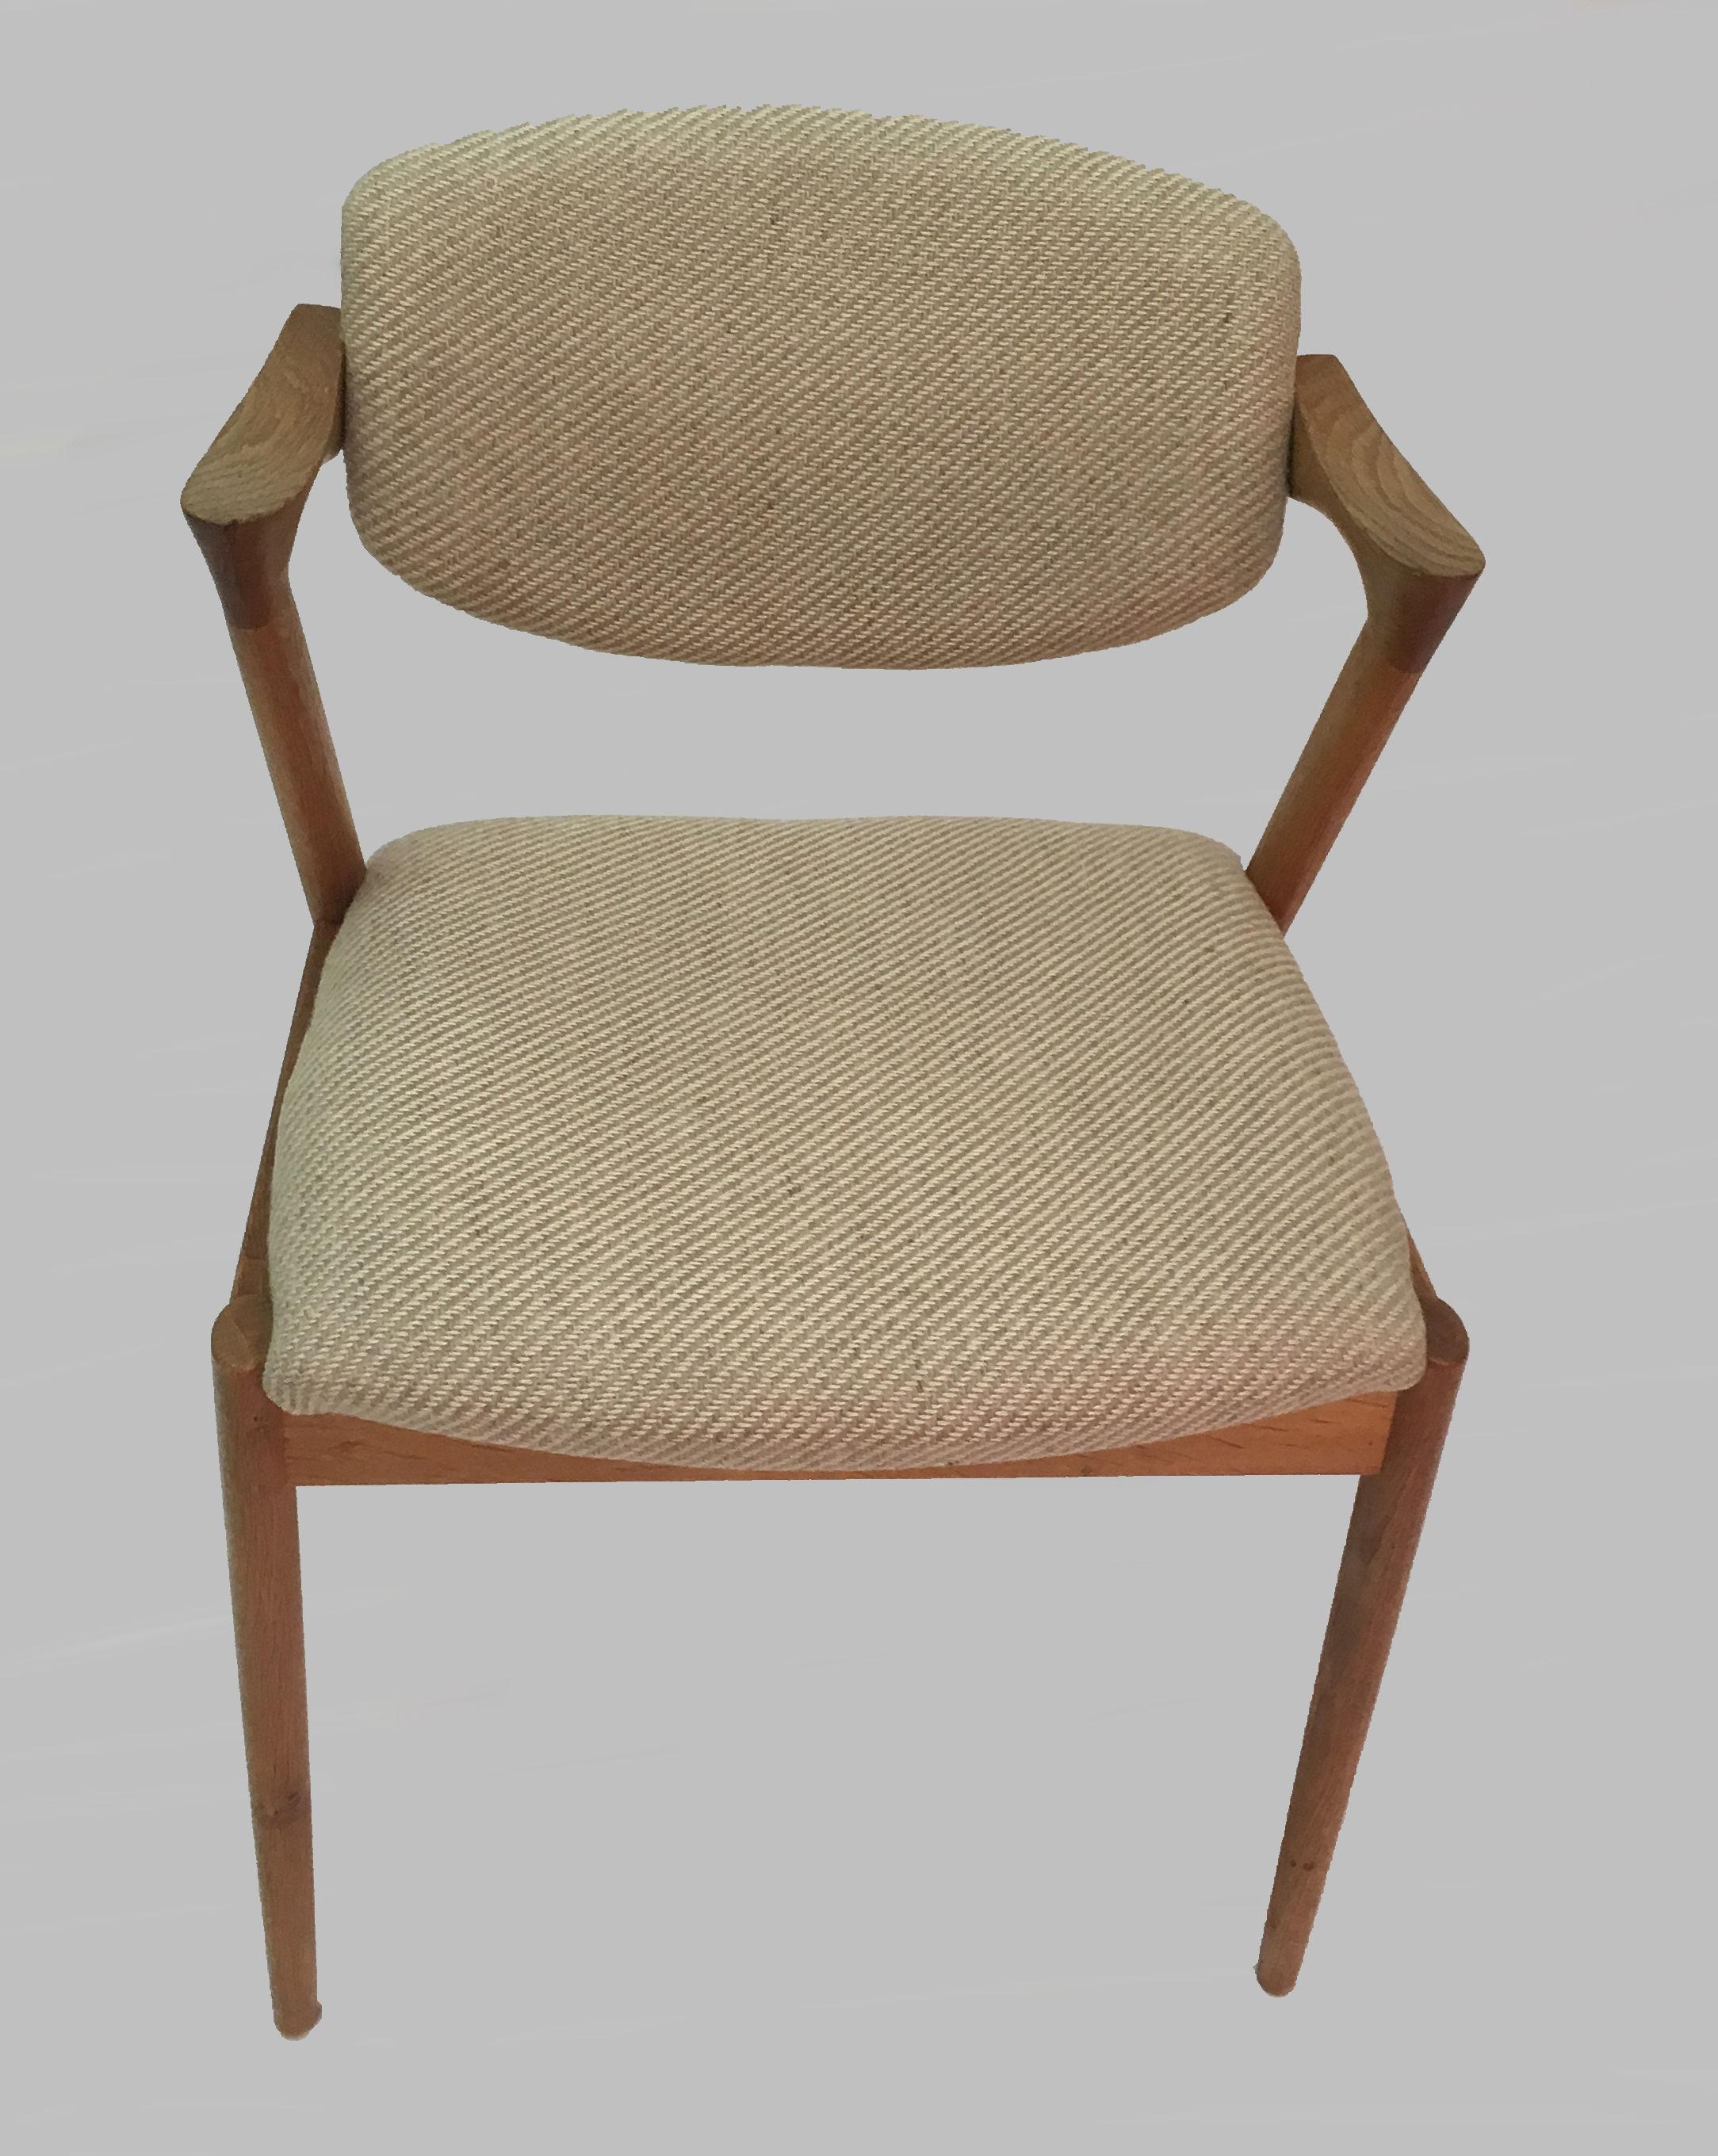 Set of eight restored and refinished dining chairs in oak with adjustable backrest by Kai Kristiansen for Schous Møbelfabrik.

The chairs have Kai Kristiansens typical light and elegant design that make them fit in easily where you want them in your